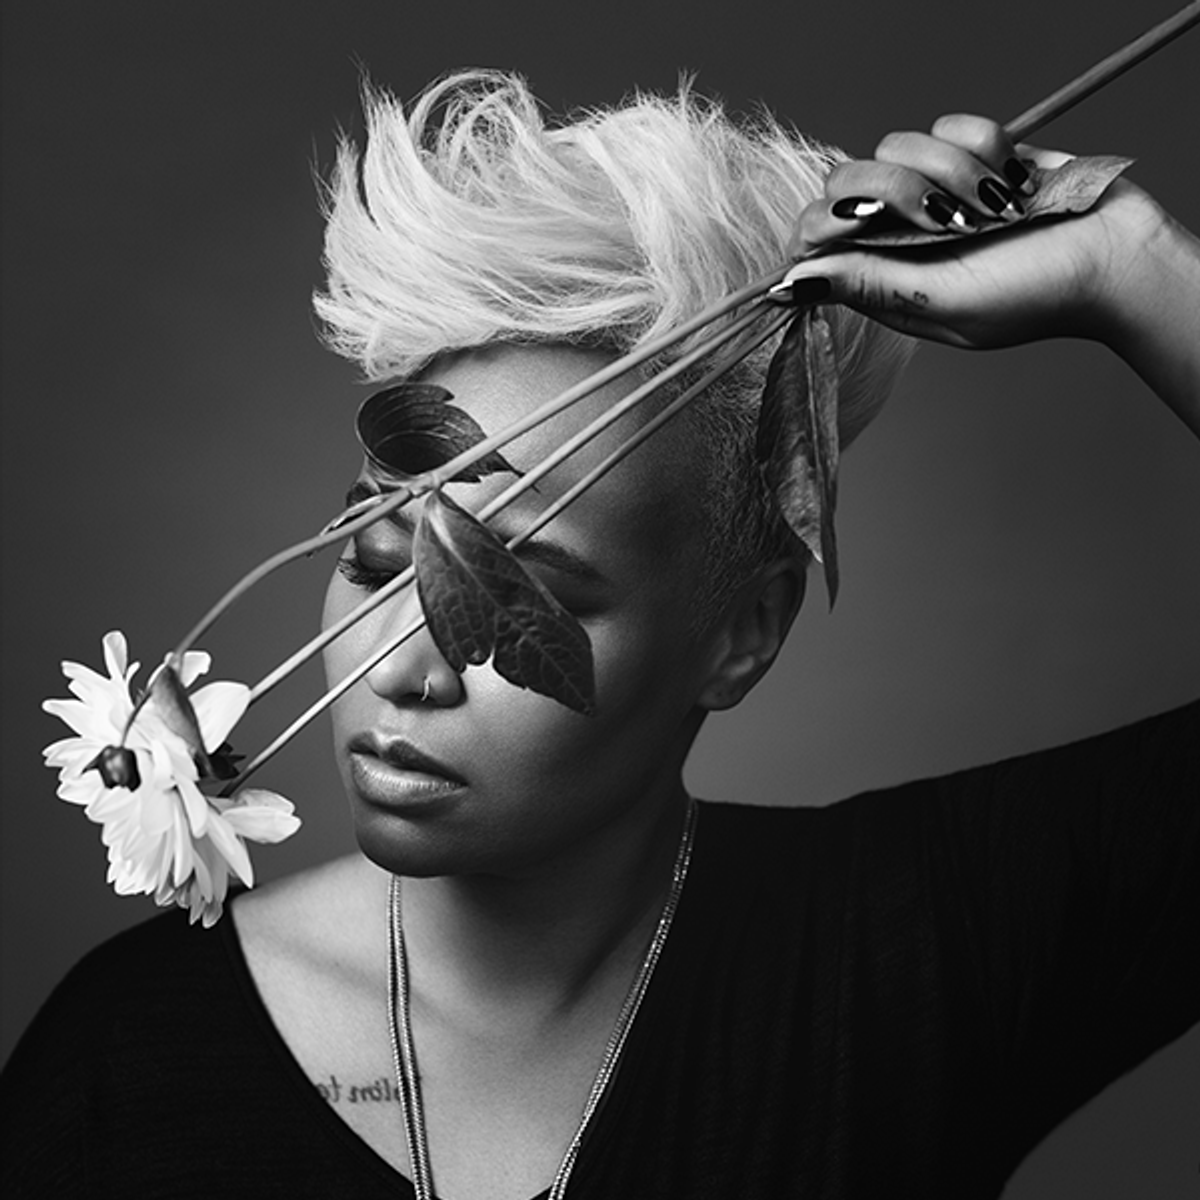 An Insight into Emeli Sande's Long Live the Angels